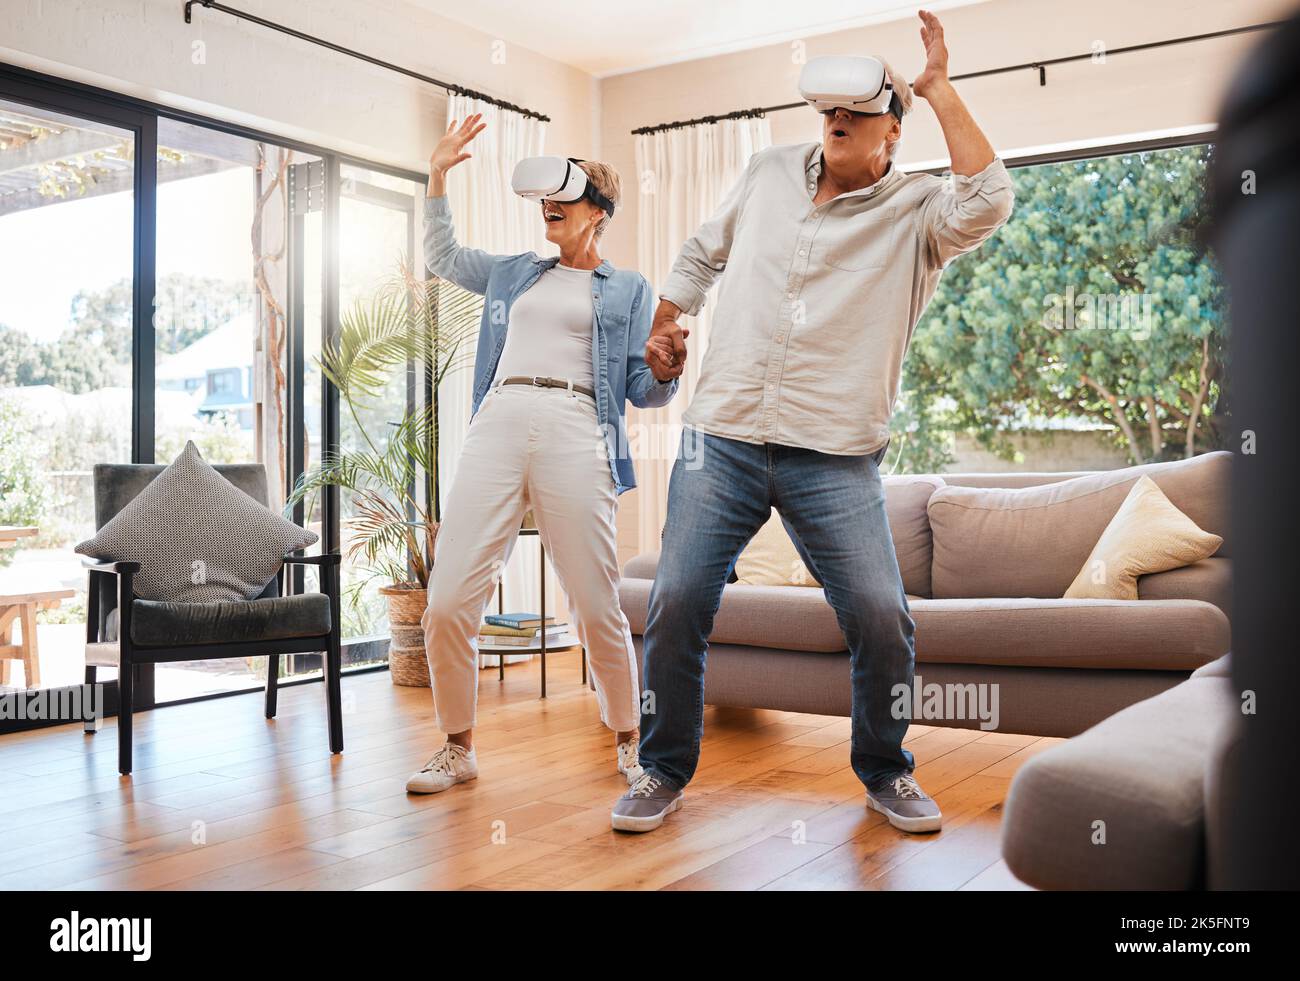 VR experience, senior couple and living room metaverse video games innovation, digital fantasy and cyber connection. Crazy man, happy woman and Stock Photo